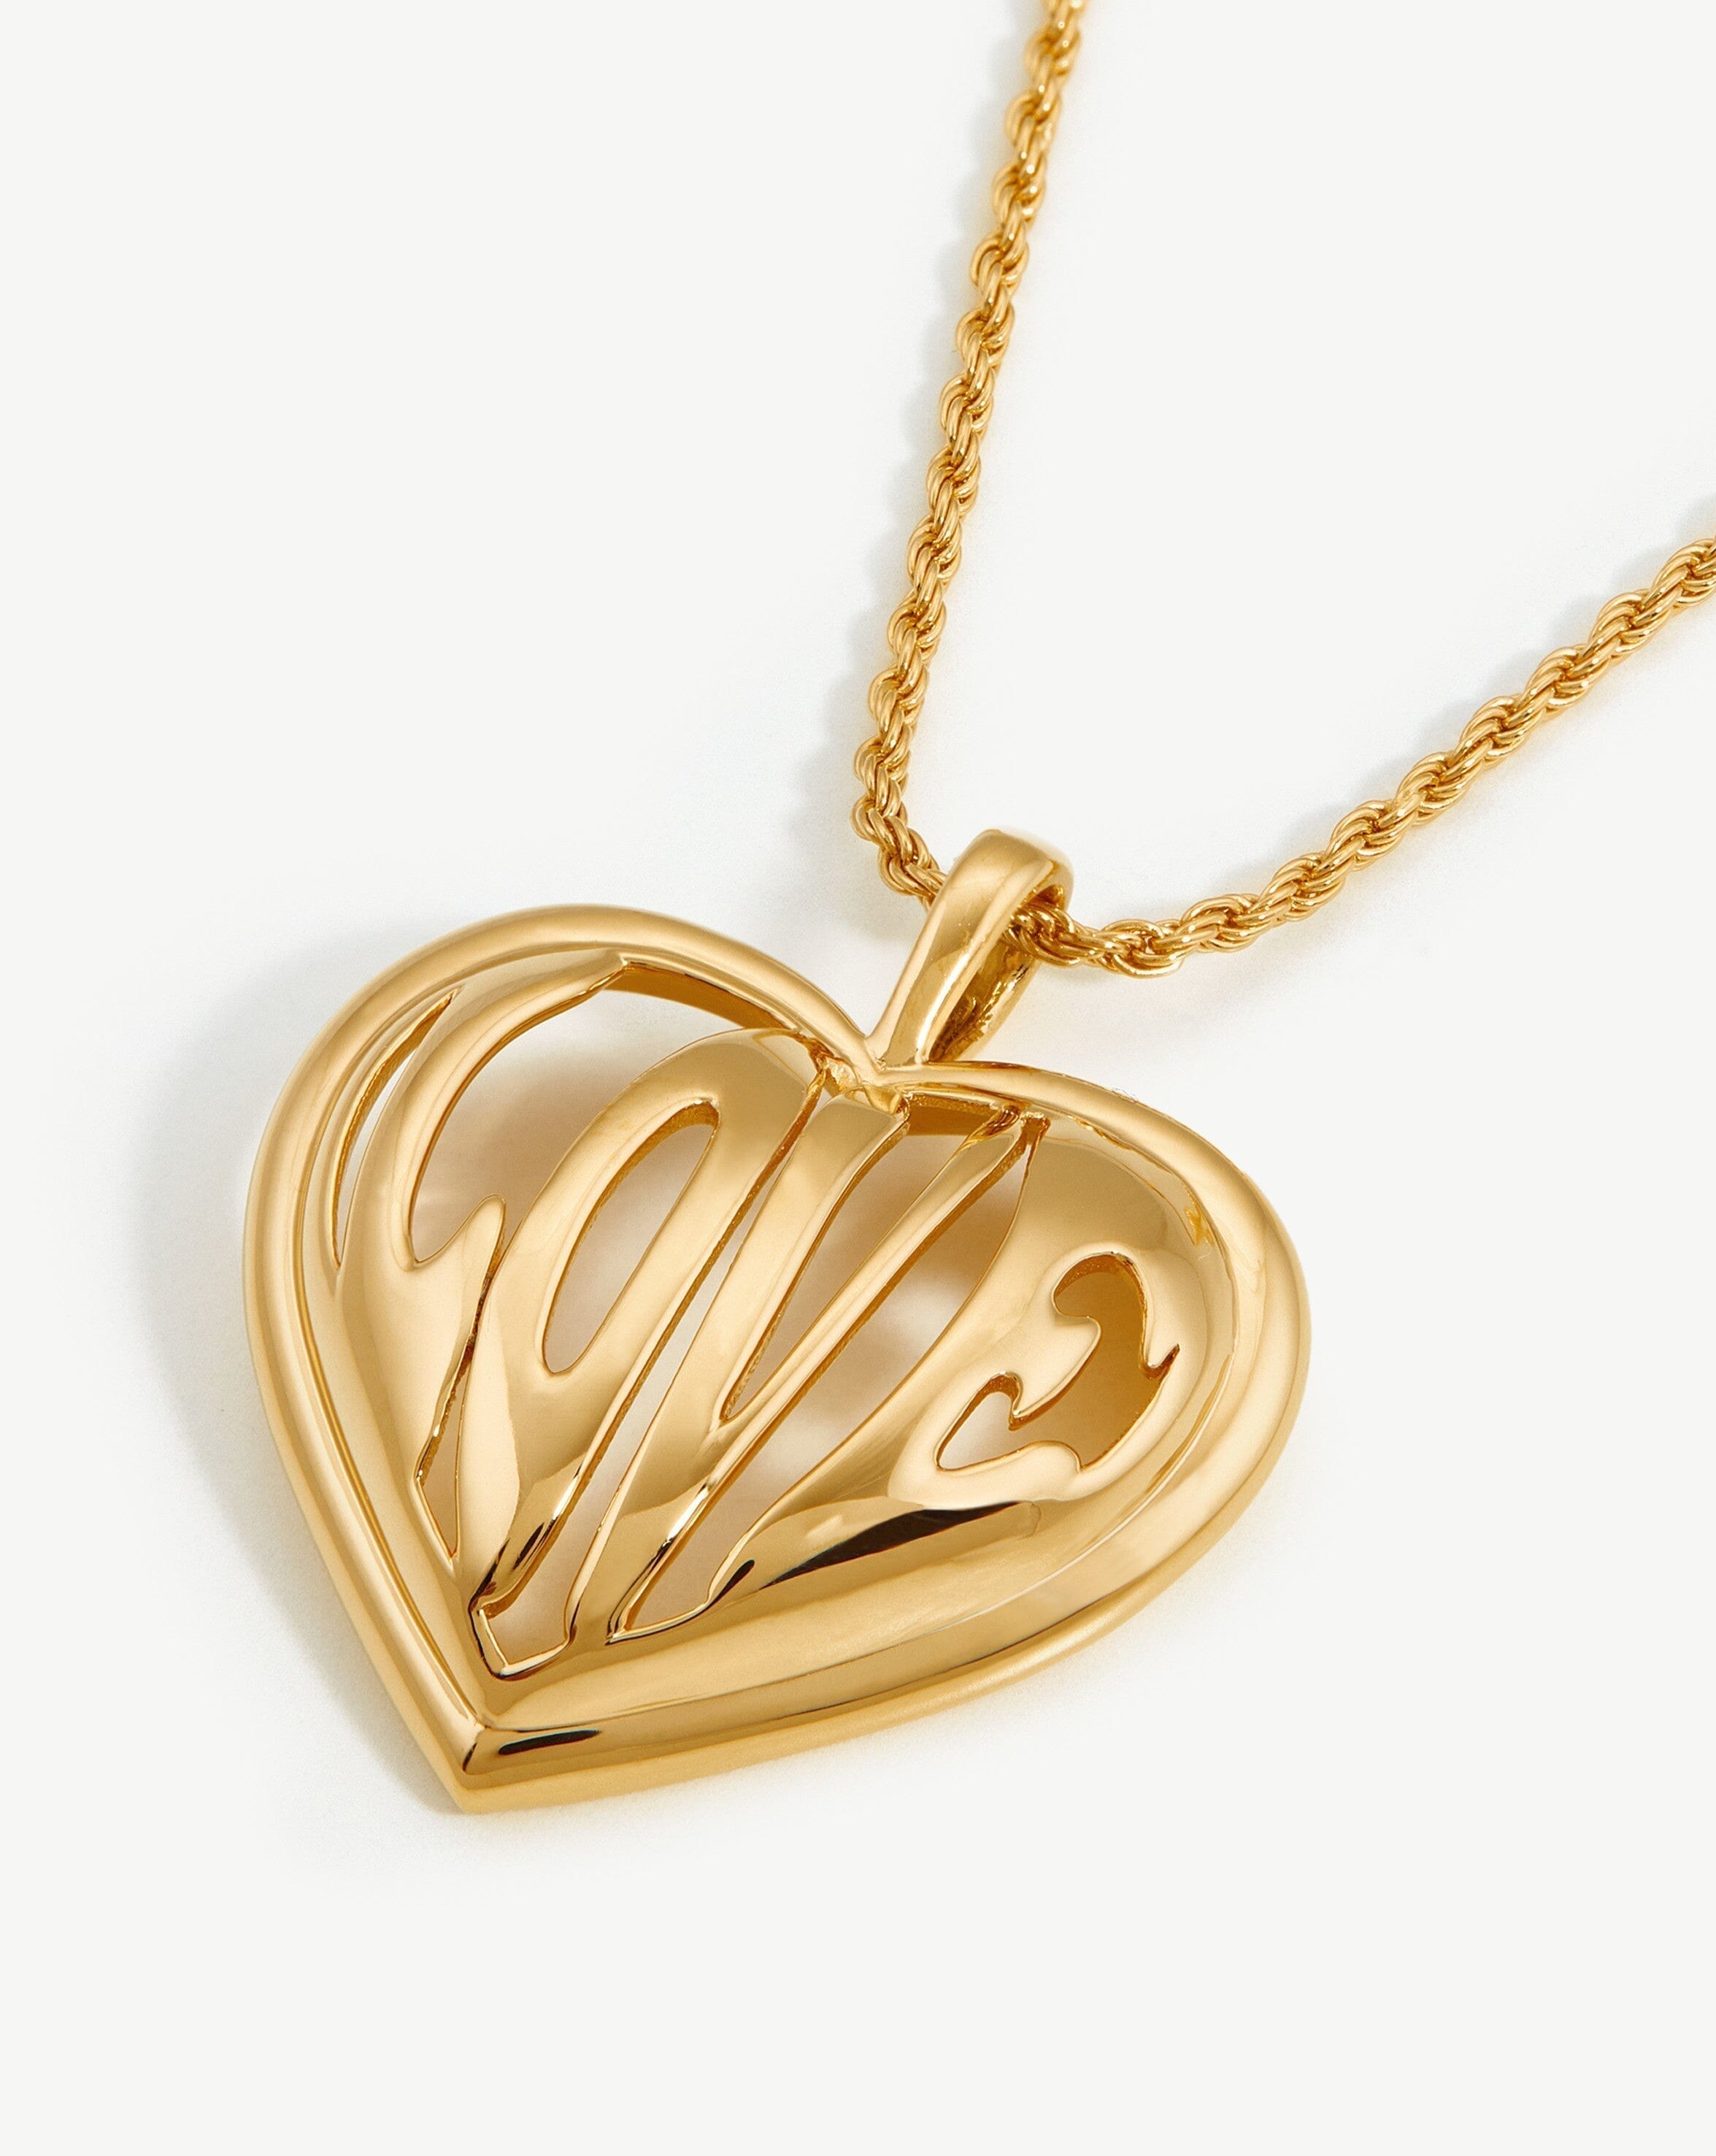 Missoma Love Heart Pendant Chain Necklace | 18ct Gold Plated Vermeil